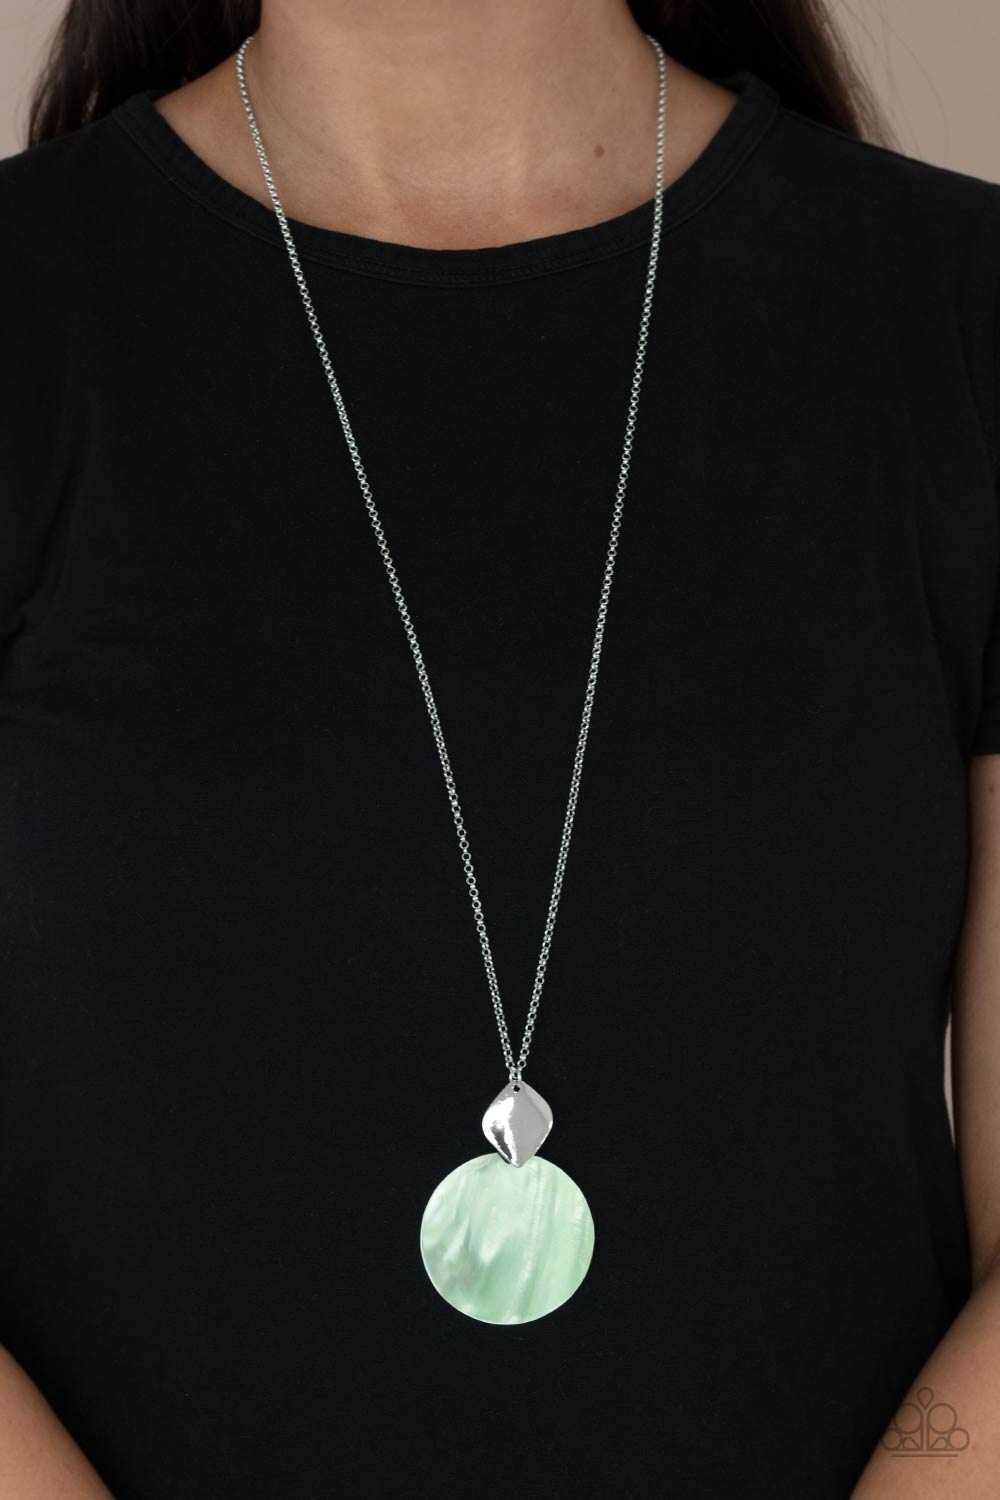 Tidal Tease Green Shell-like Necklace - Paparazzi Accessories- lightbox - CarasShop.com - $5 Jewelry by Cara Jewels